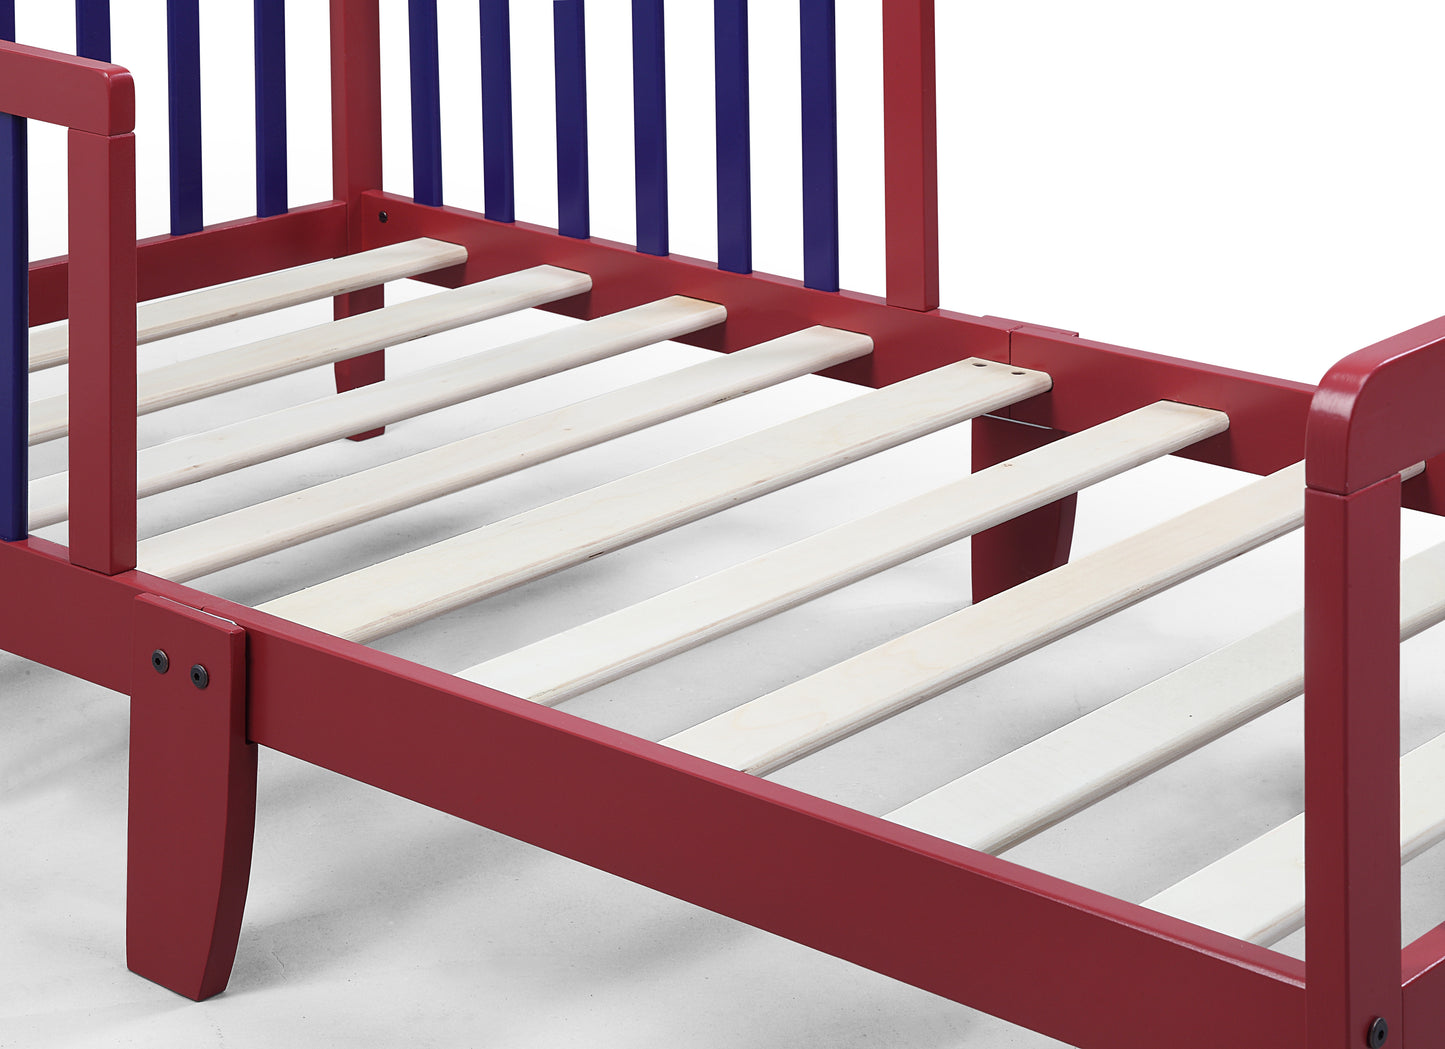 Twain Toddler Bed Red/Blue